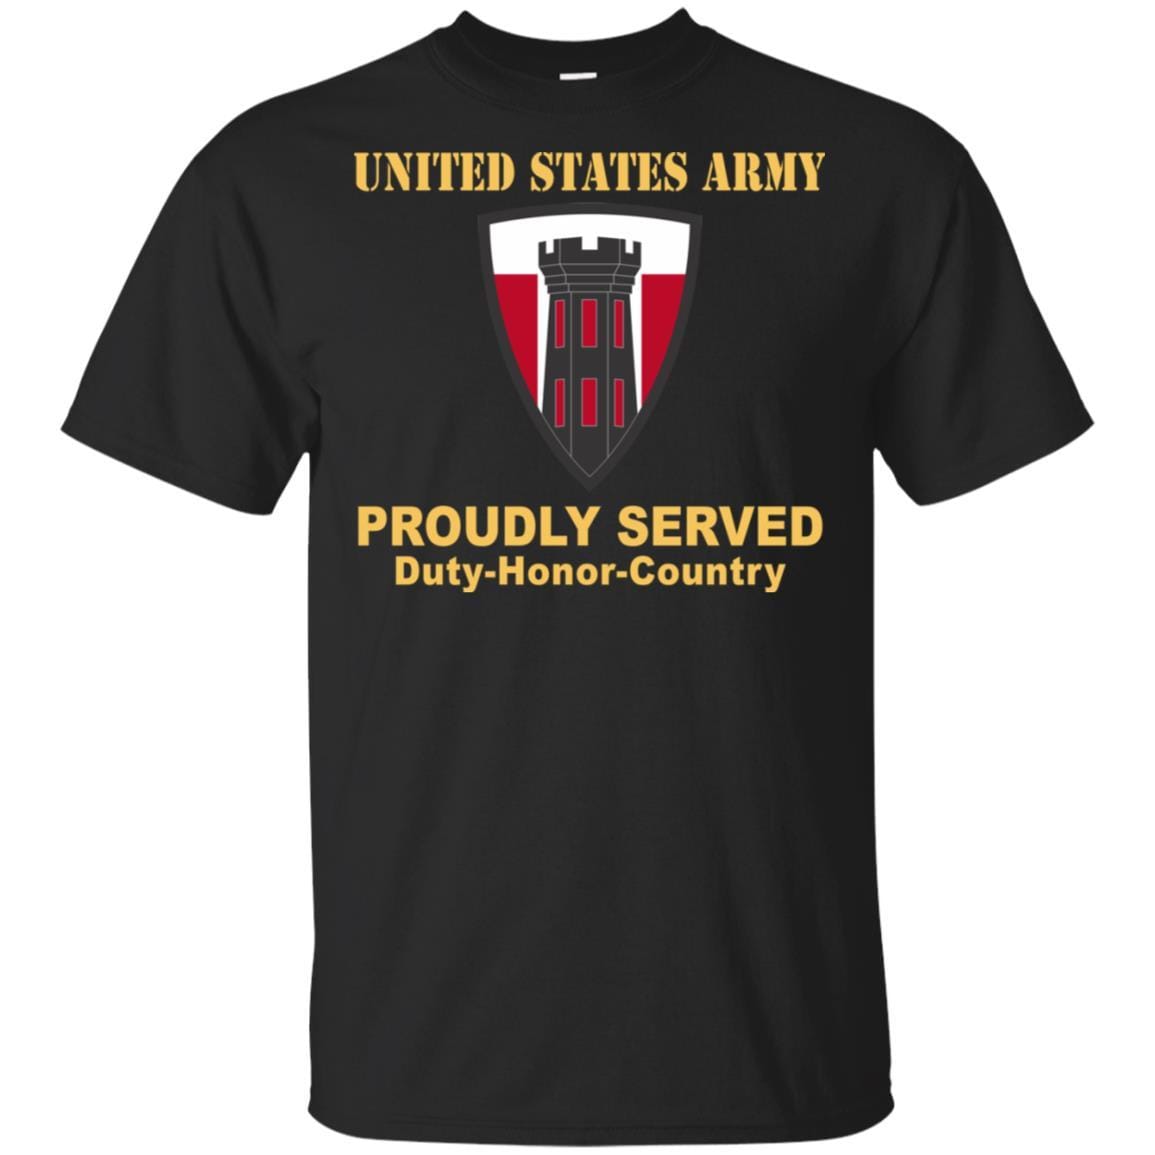 US ARMY 176TH ENGINEER BRIGADE- Proudly Served T-Shirt On Front For Men-TShirt-Army-Veterans Nation